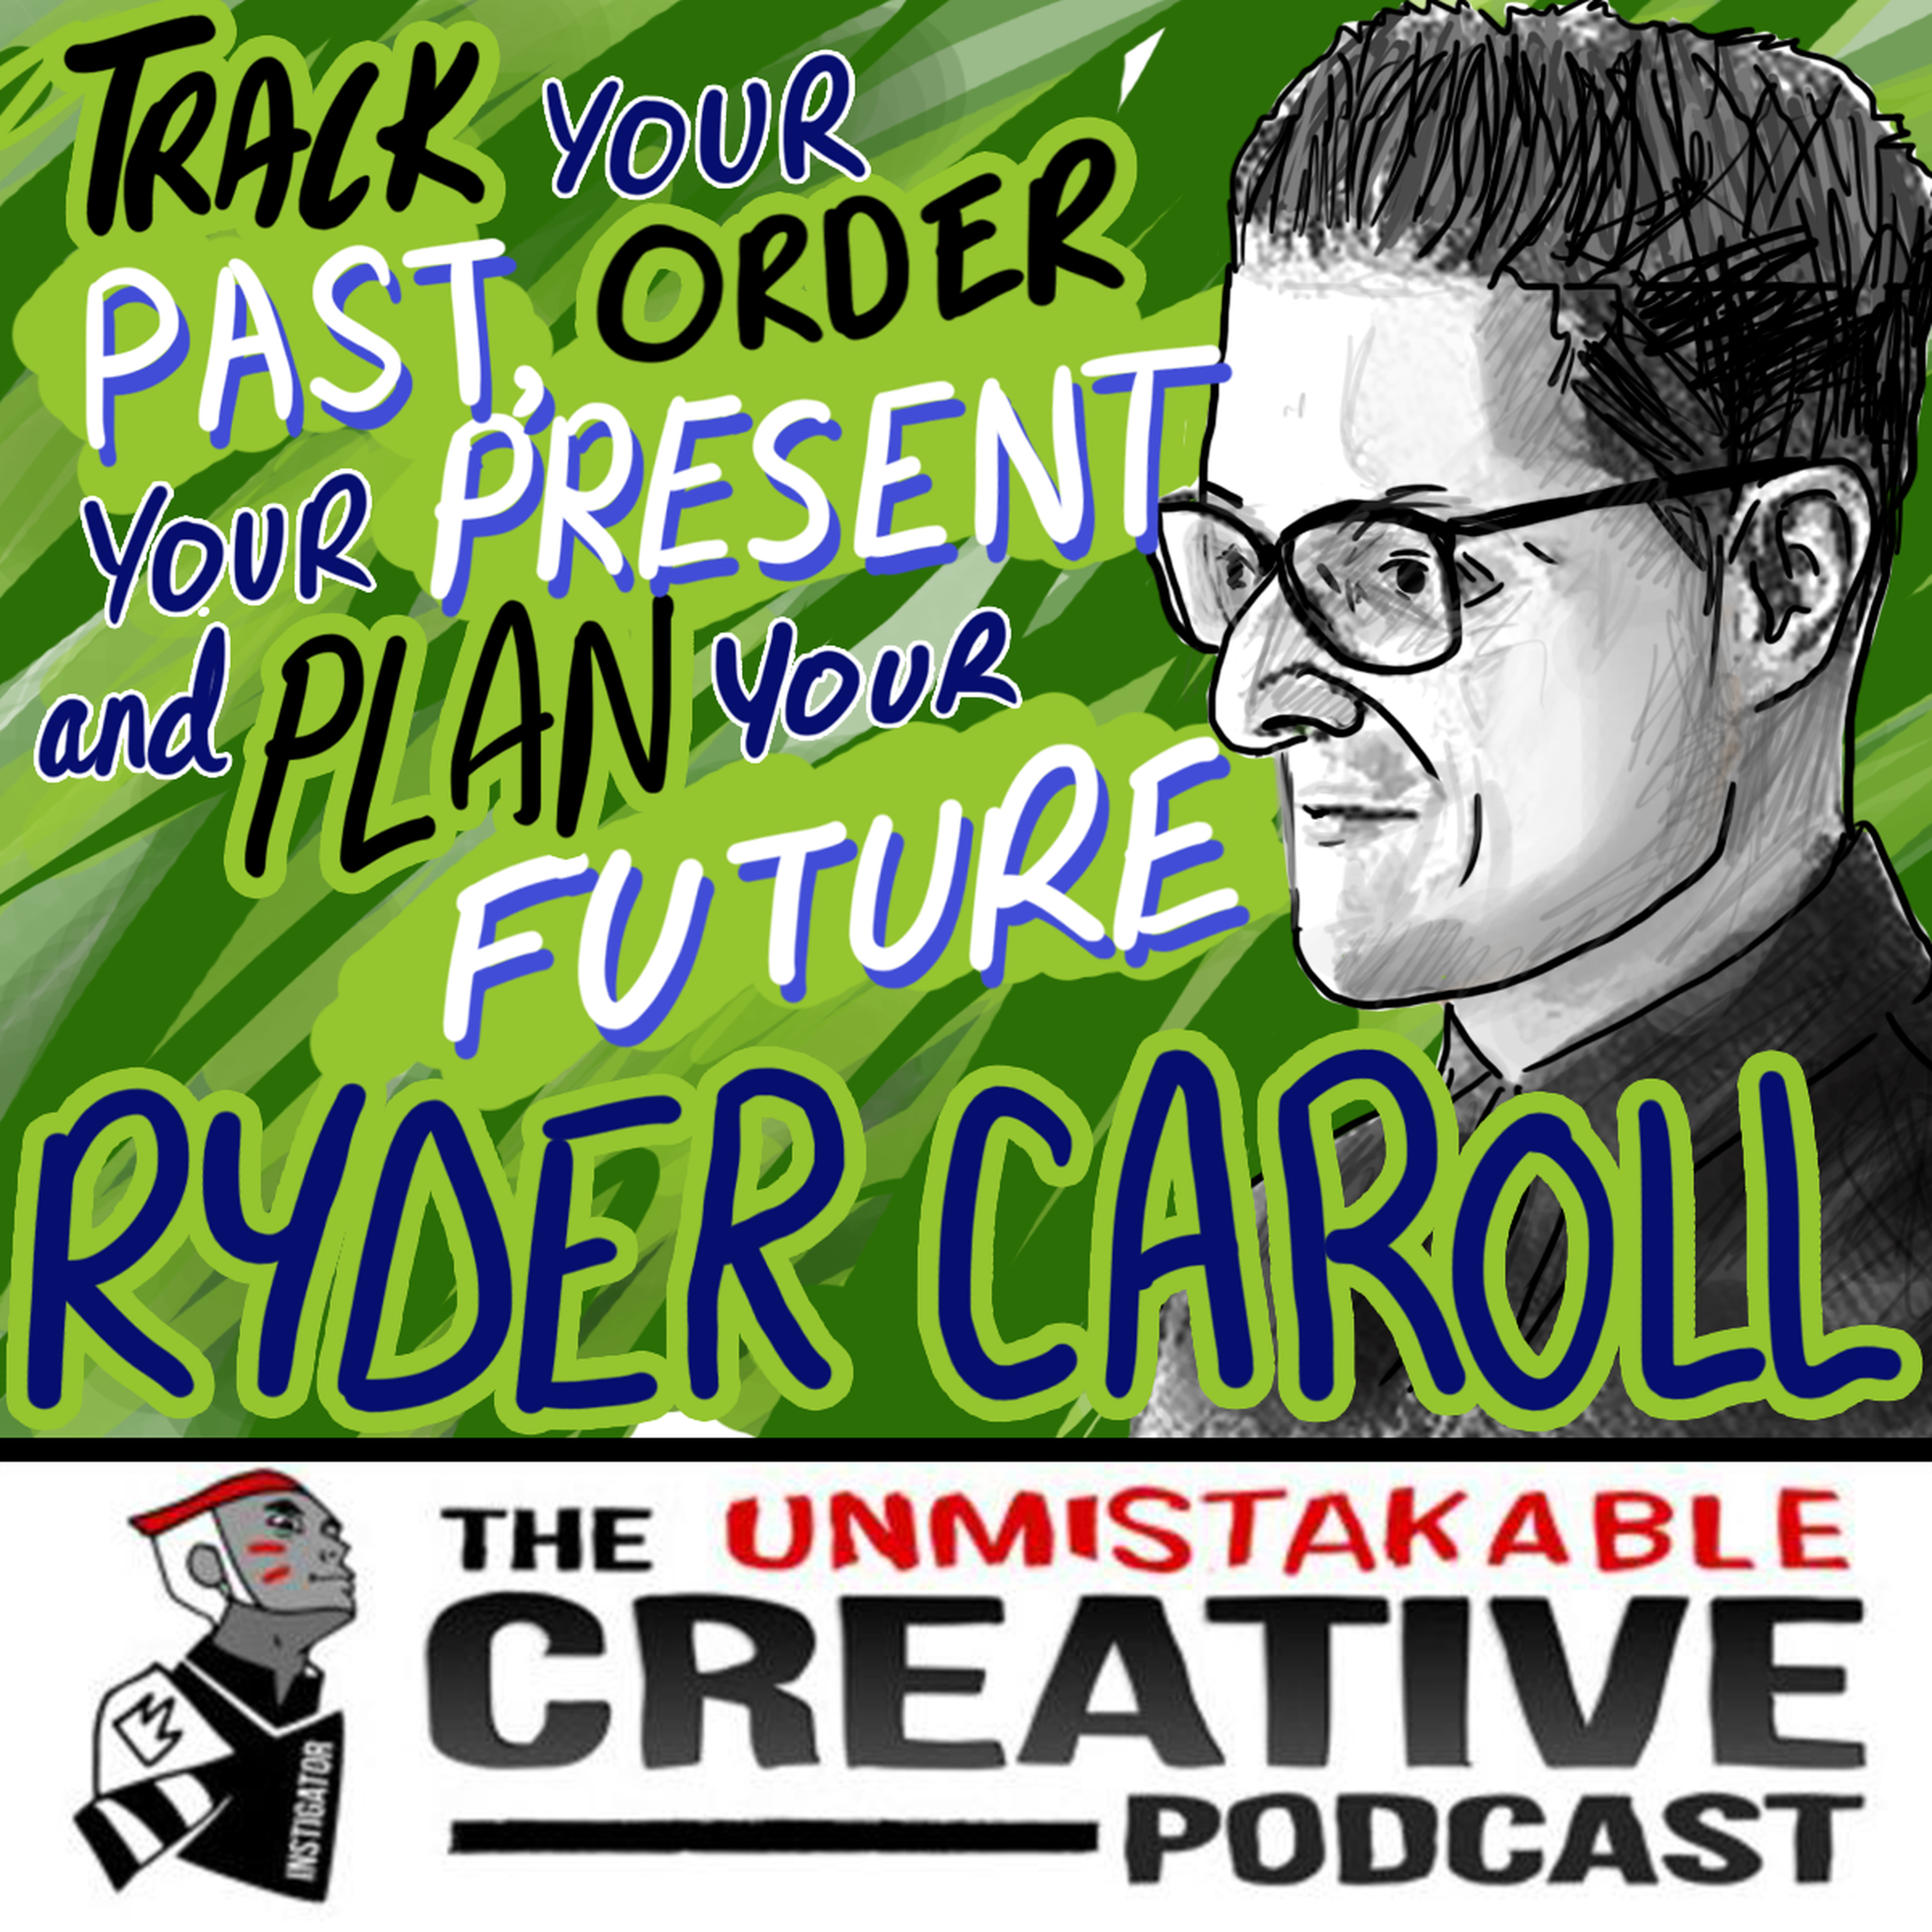 Best of 2019: Ryder Caroll: Track Your Past, Order Your Present, and Plan Your Future